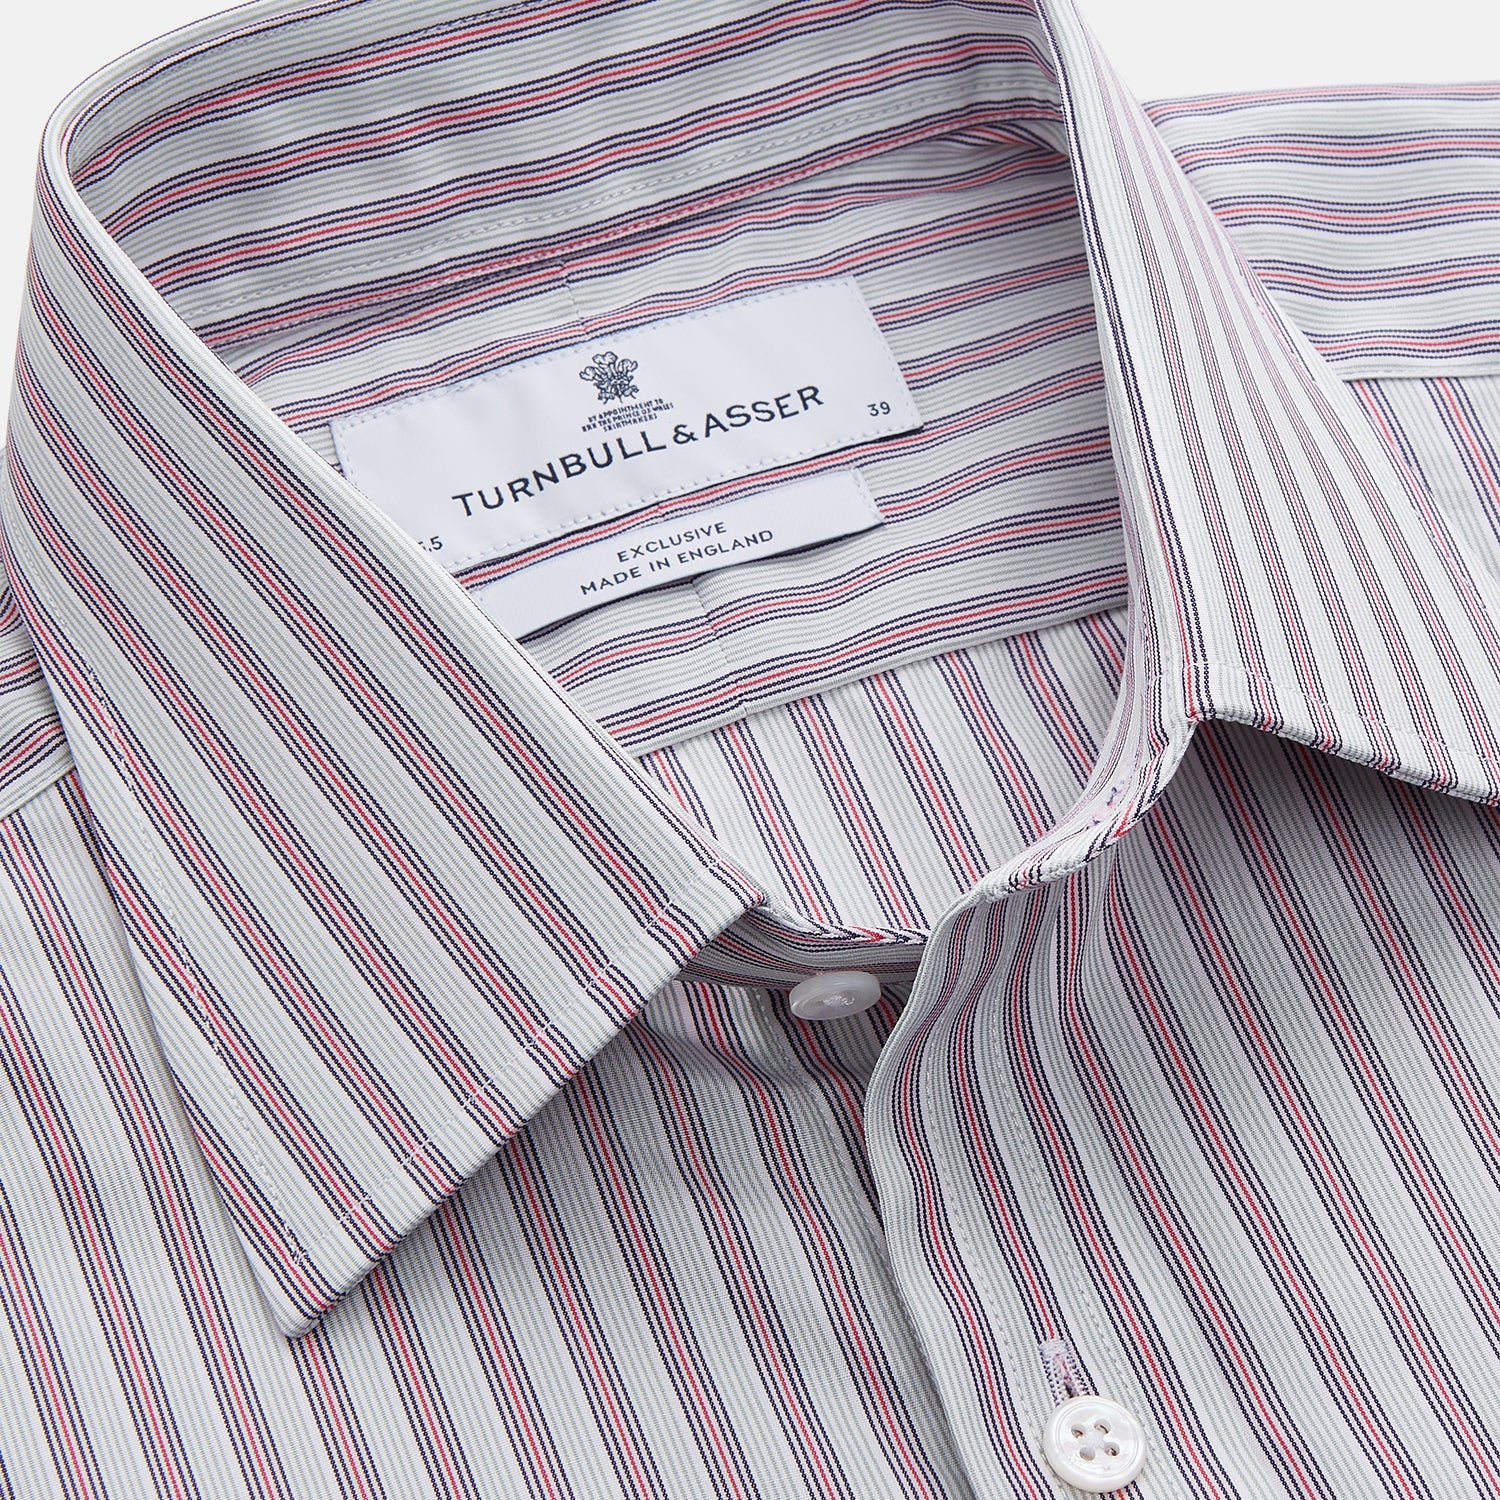 Red and Blue Stripe Cotton Regular Fit Mayfair Shirt